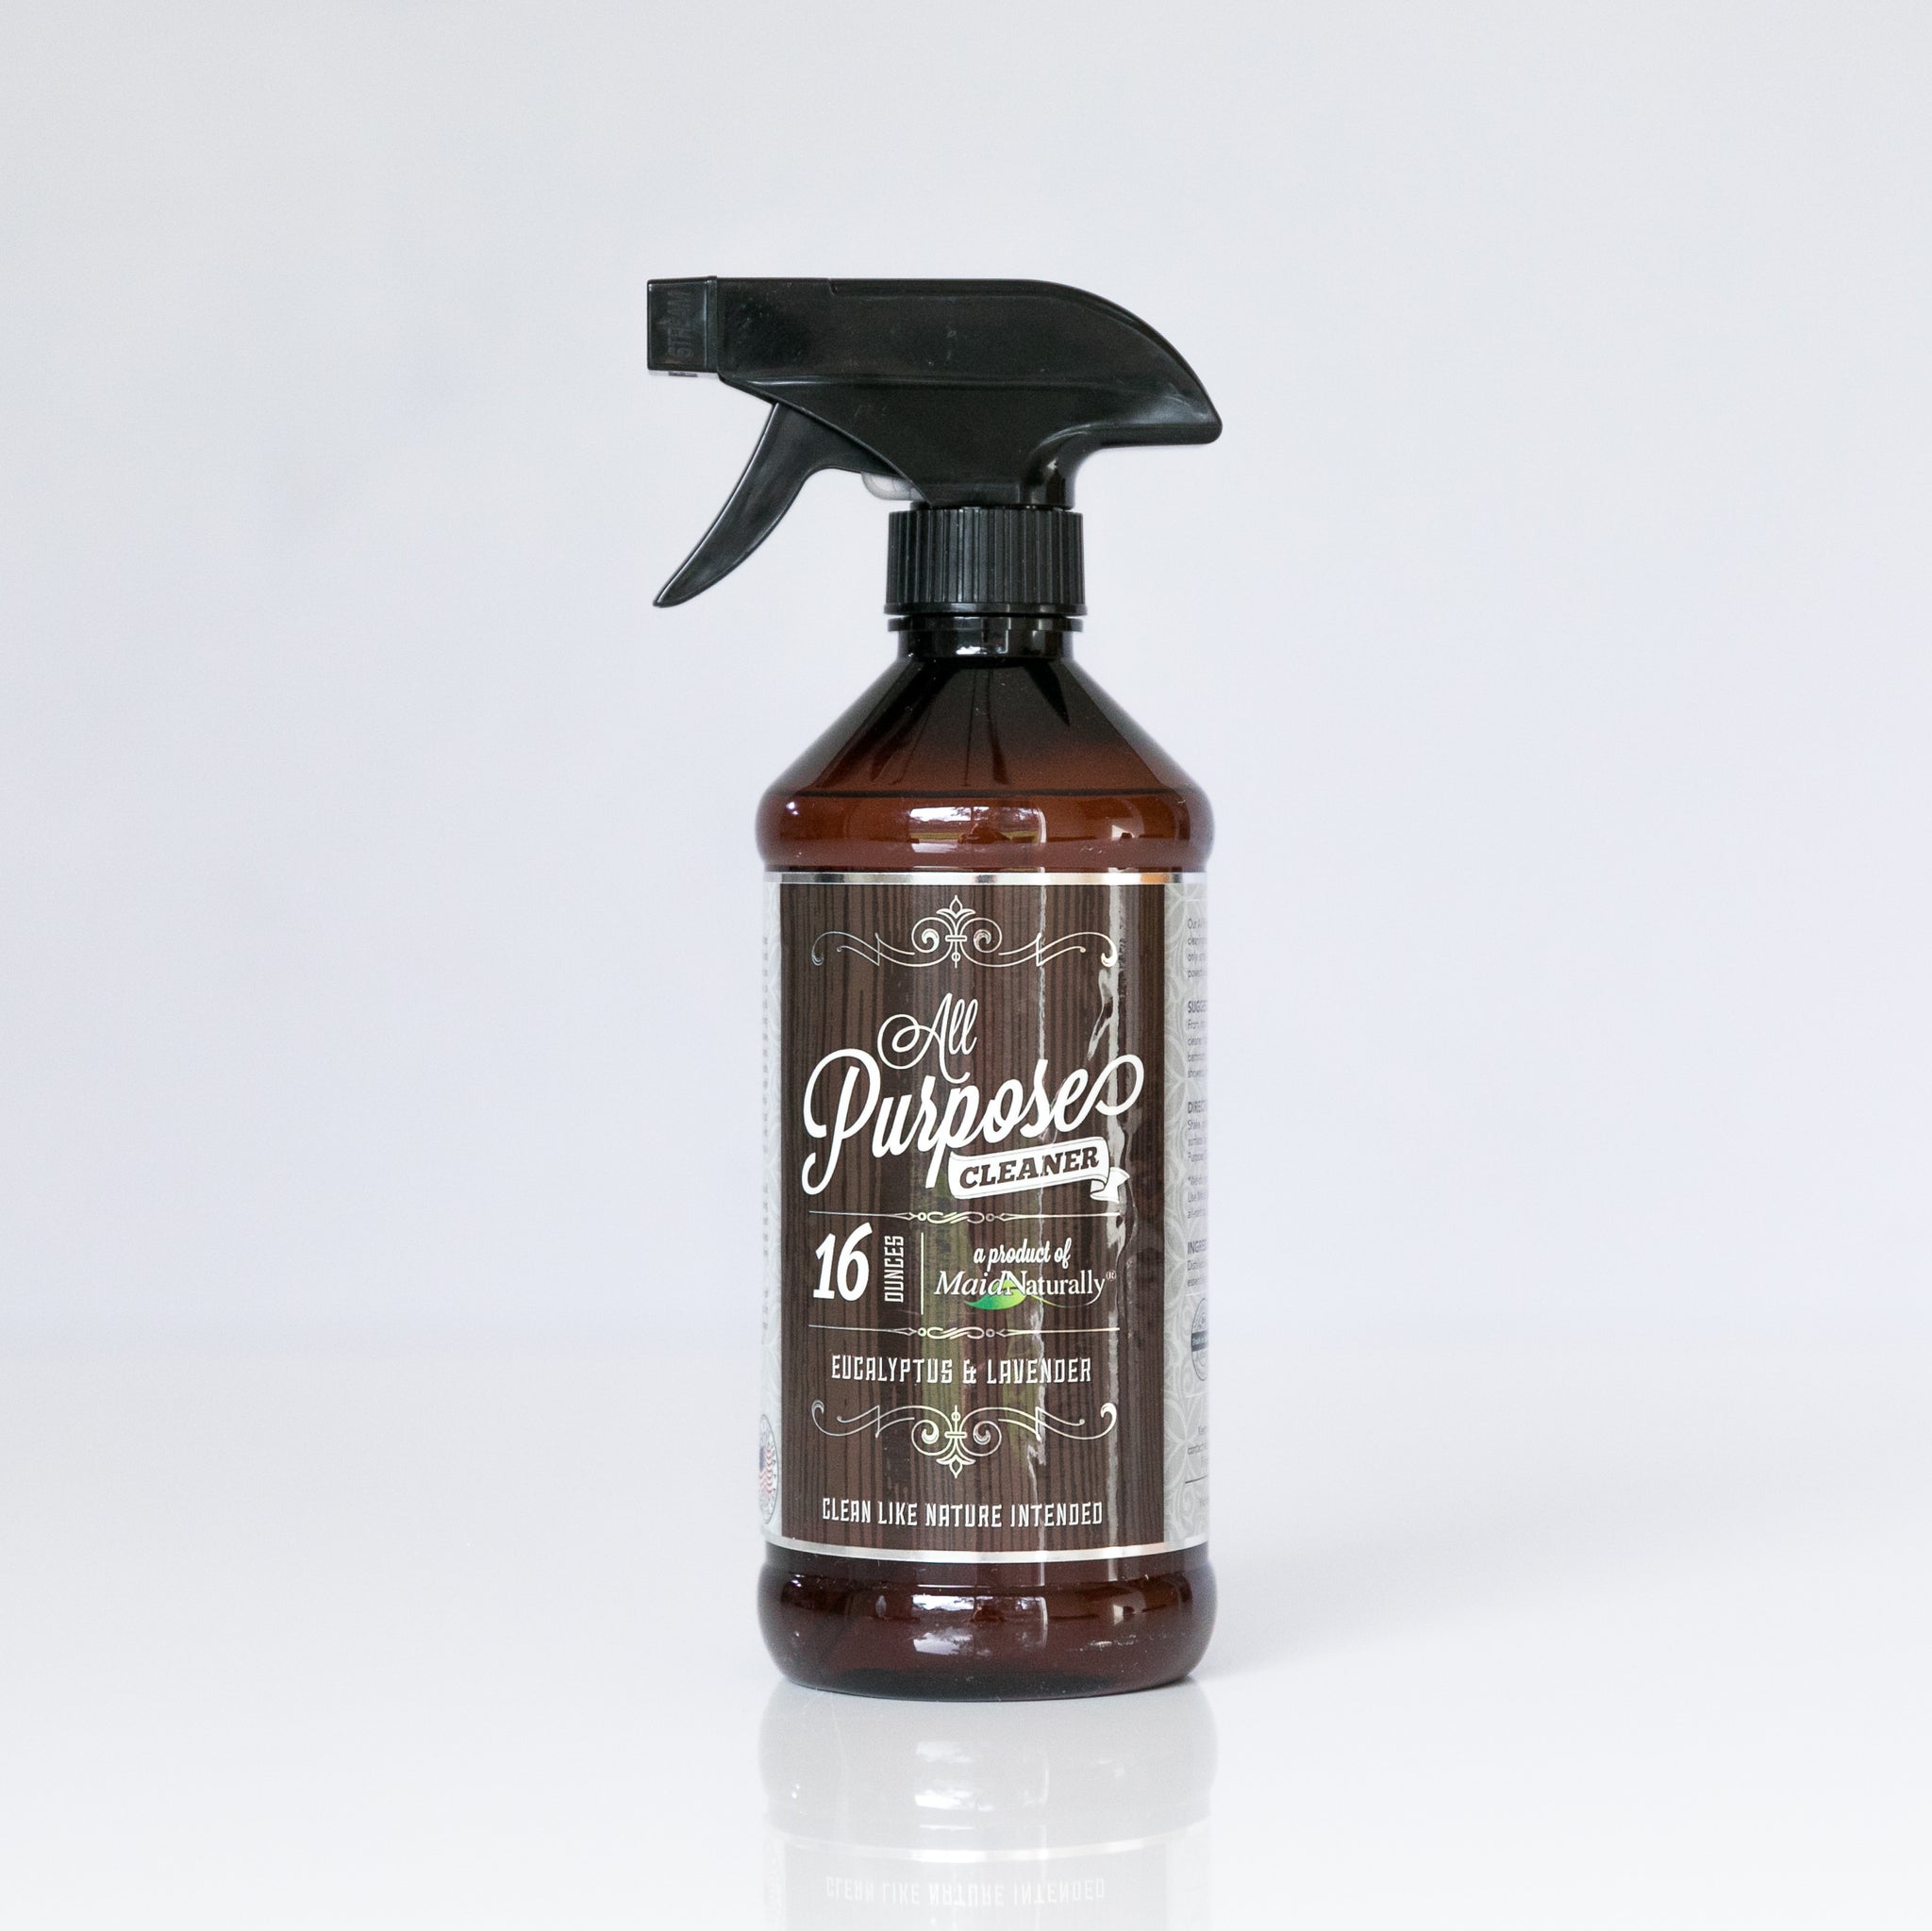 Maid Naturally Eucalyptus and Lavender All Purpose Cleaning Spray